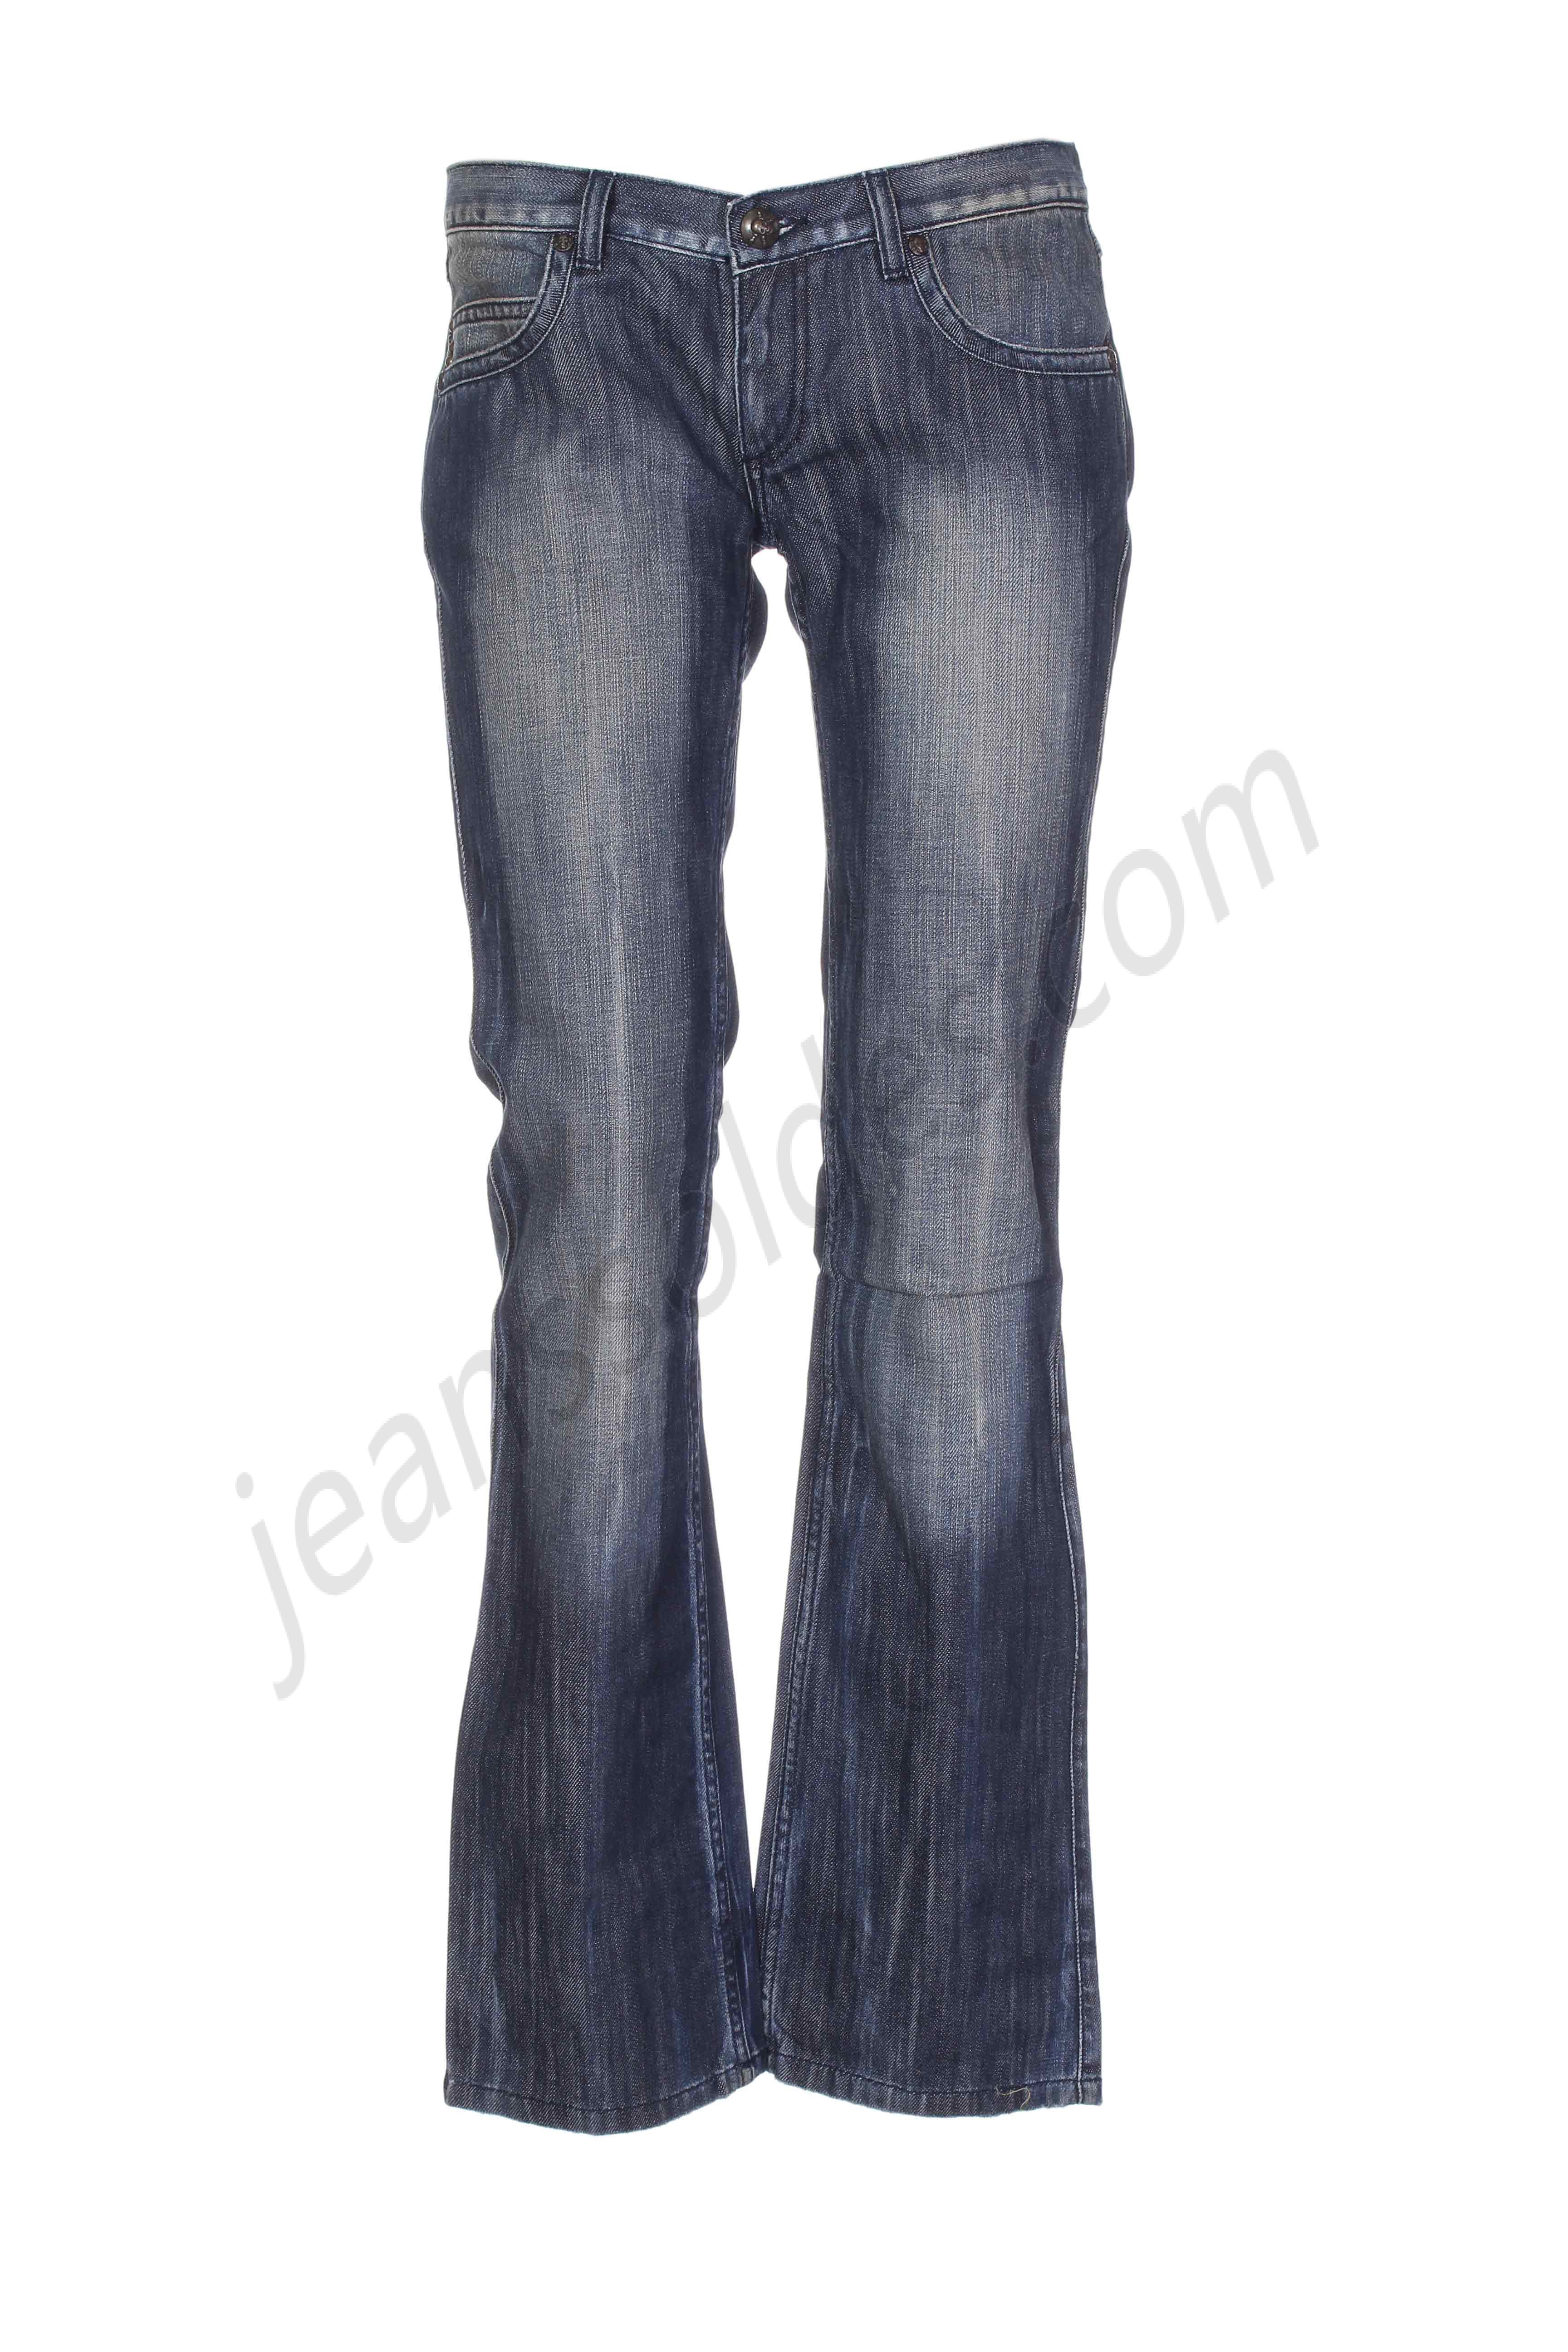 n&vy-Jeans coupe droite prix d’amis - n&vy-Jeans coupe droite prix d’amis